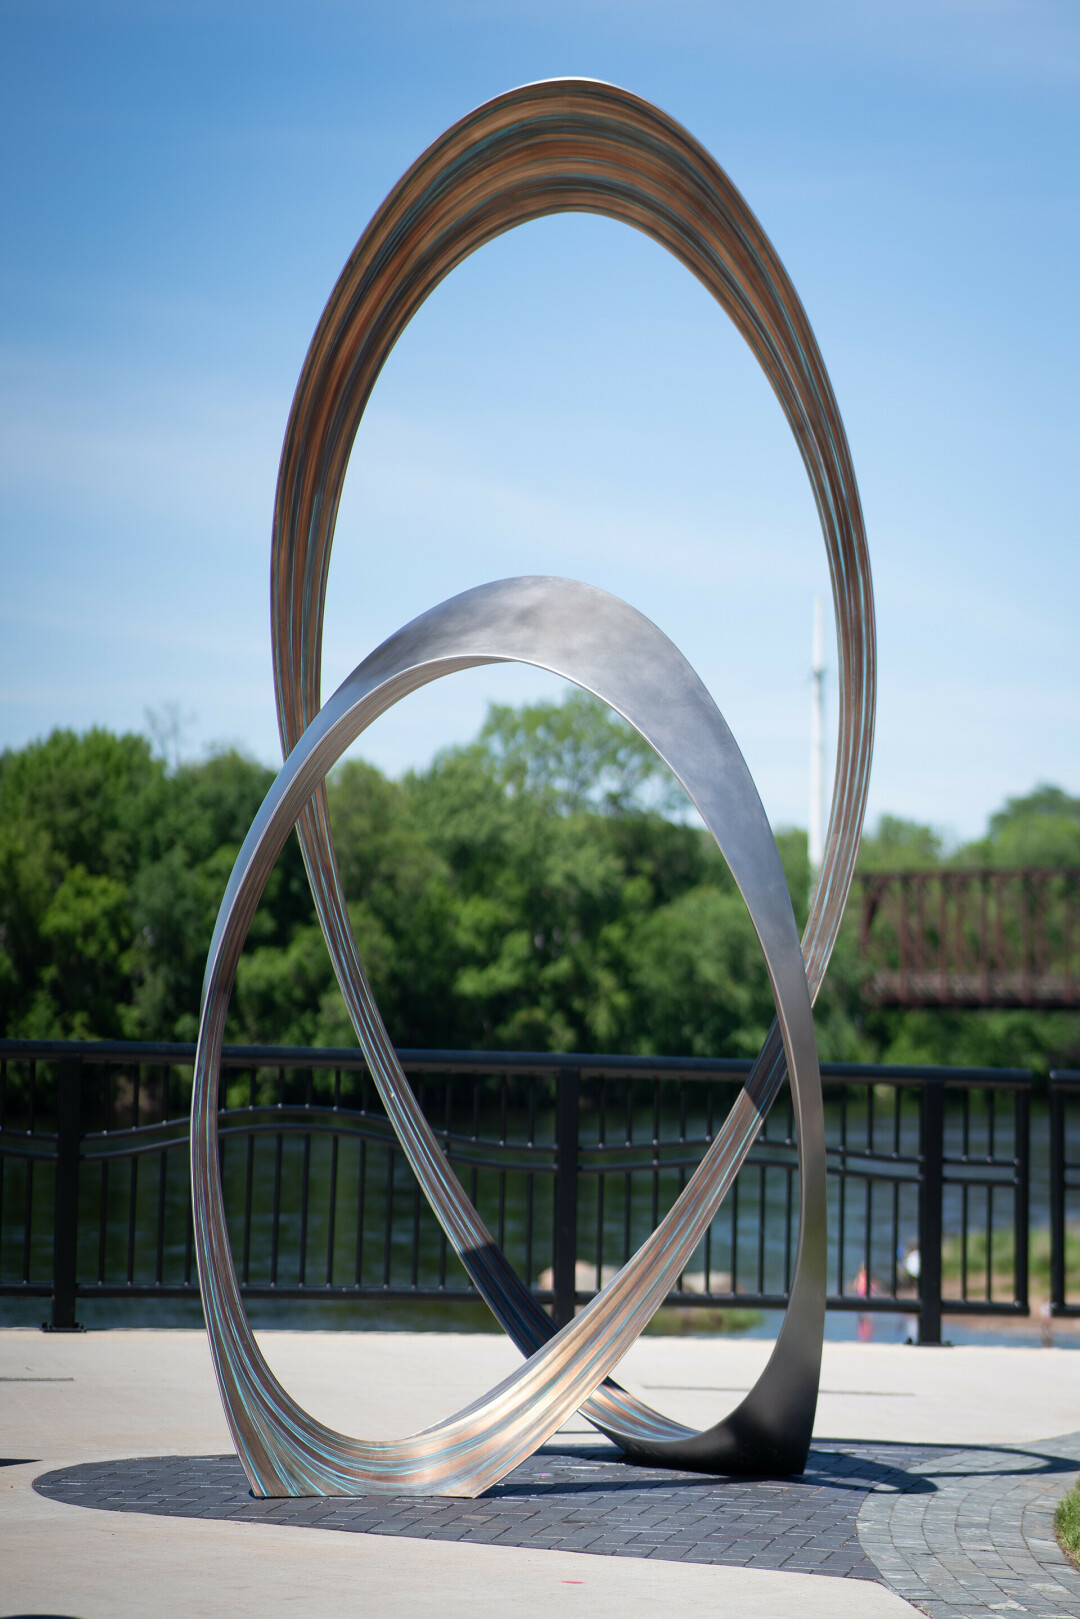 A SOARING NEW SCULPTURE. Check out the new "Eddies" sculpture, which was installed on May 29 as a grand finale to this year's Creative Economy Month in downtown Eau Claire.